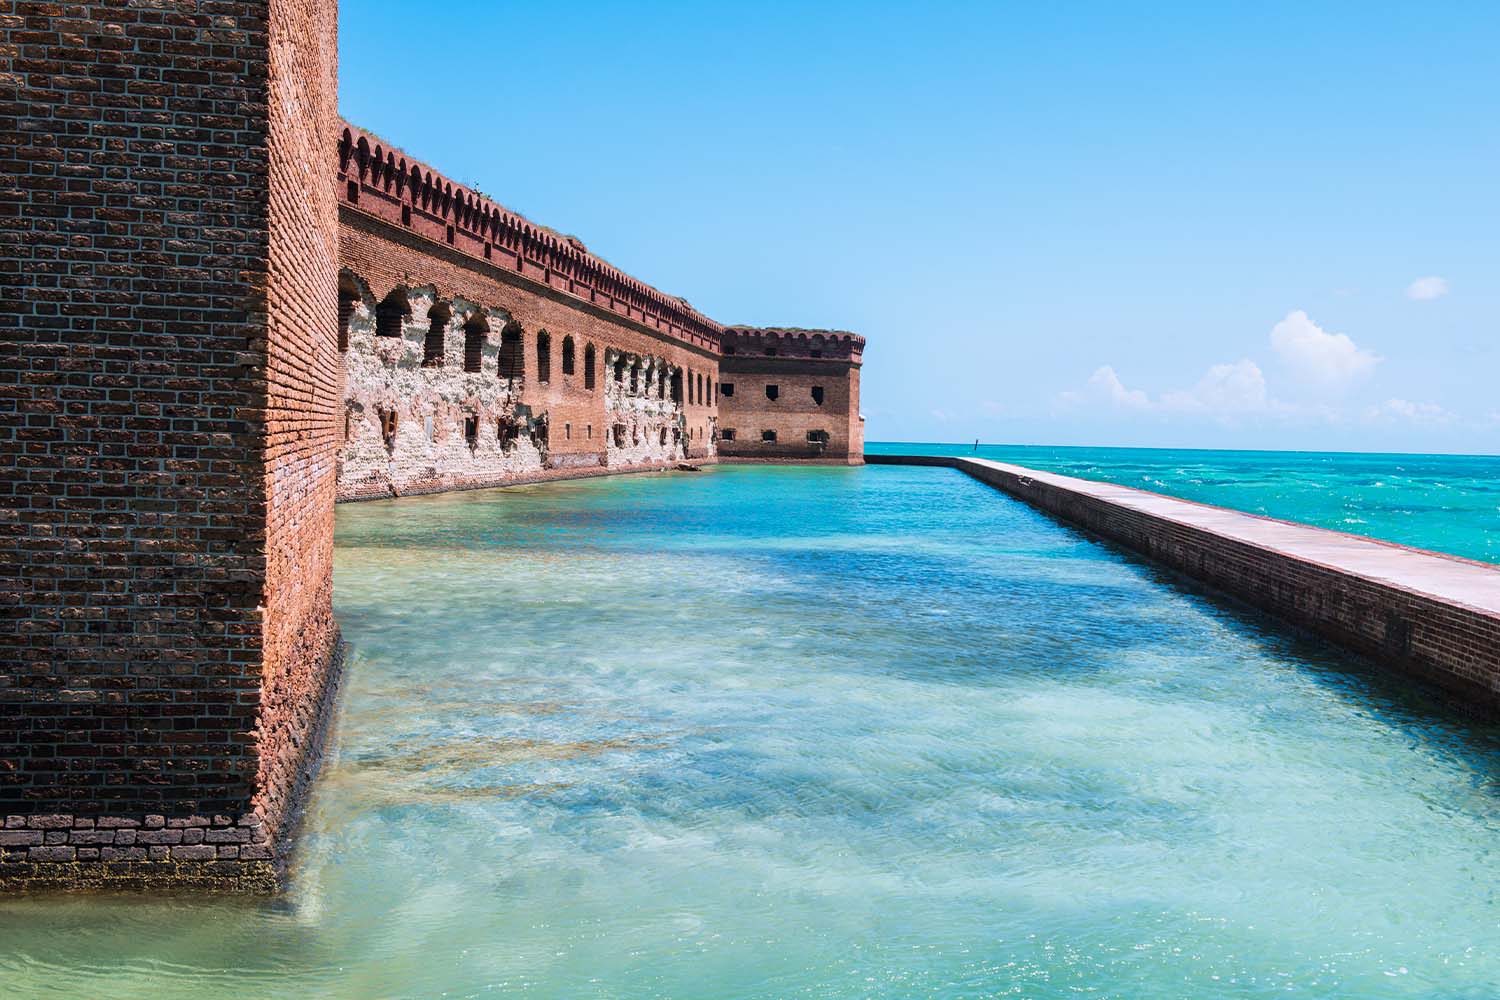 Fort Jefferson Military Fortress in the Dry Tortugas National Park